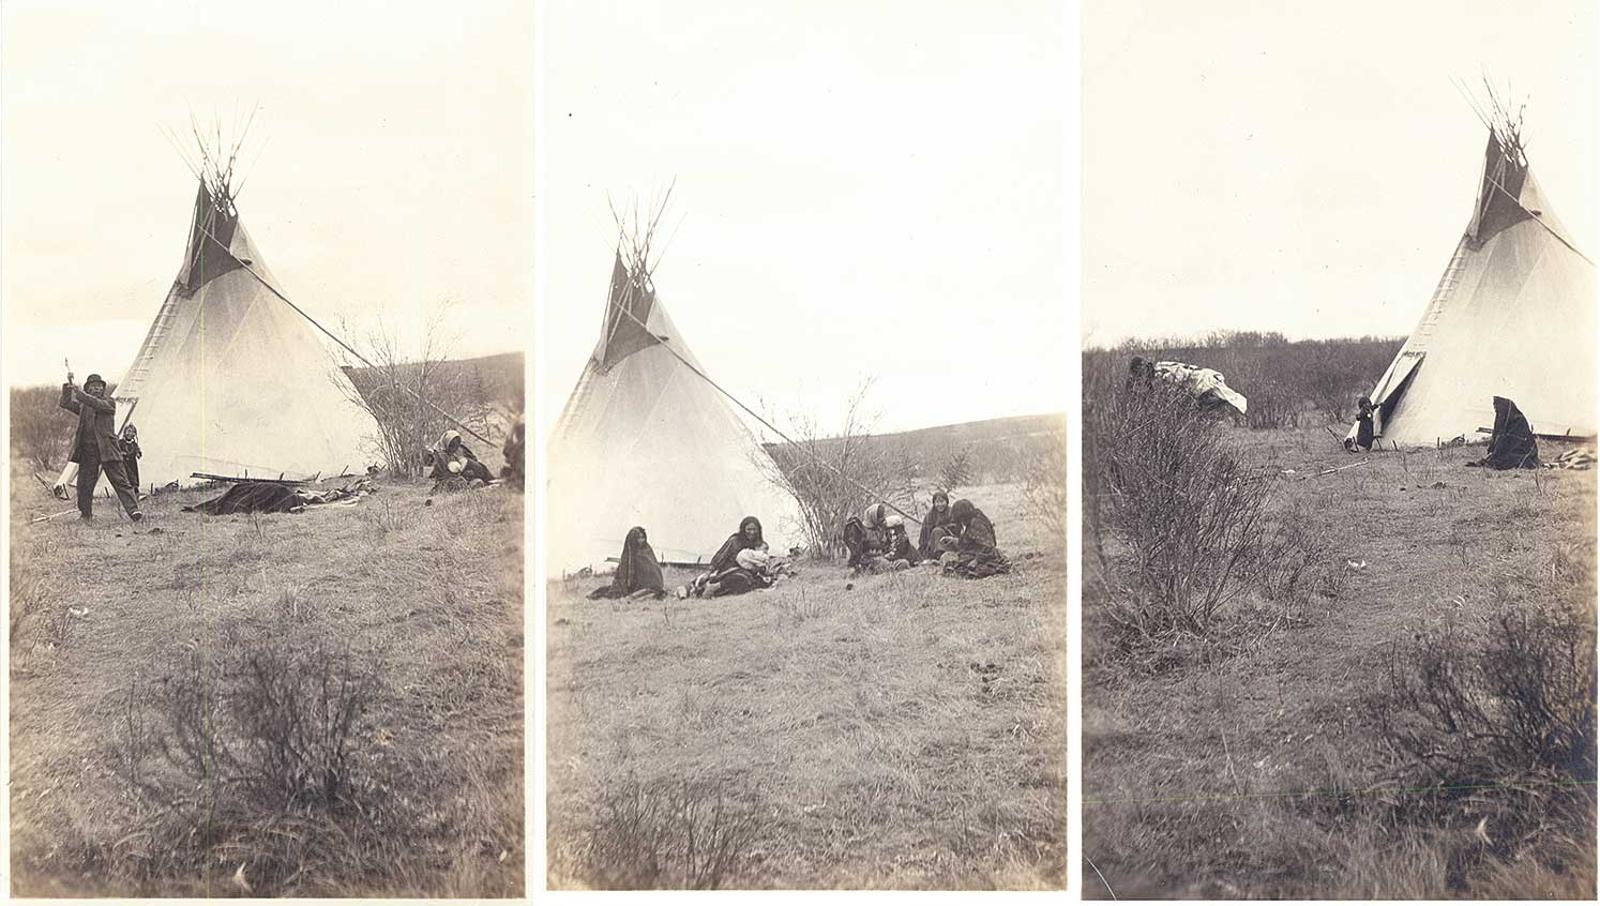 Banff School - Untitled - Indians and Teepee